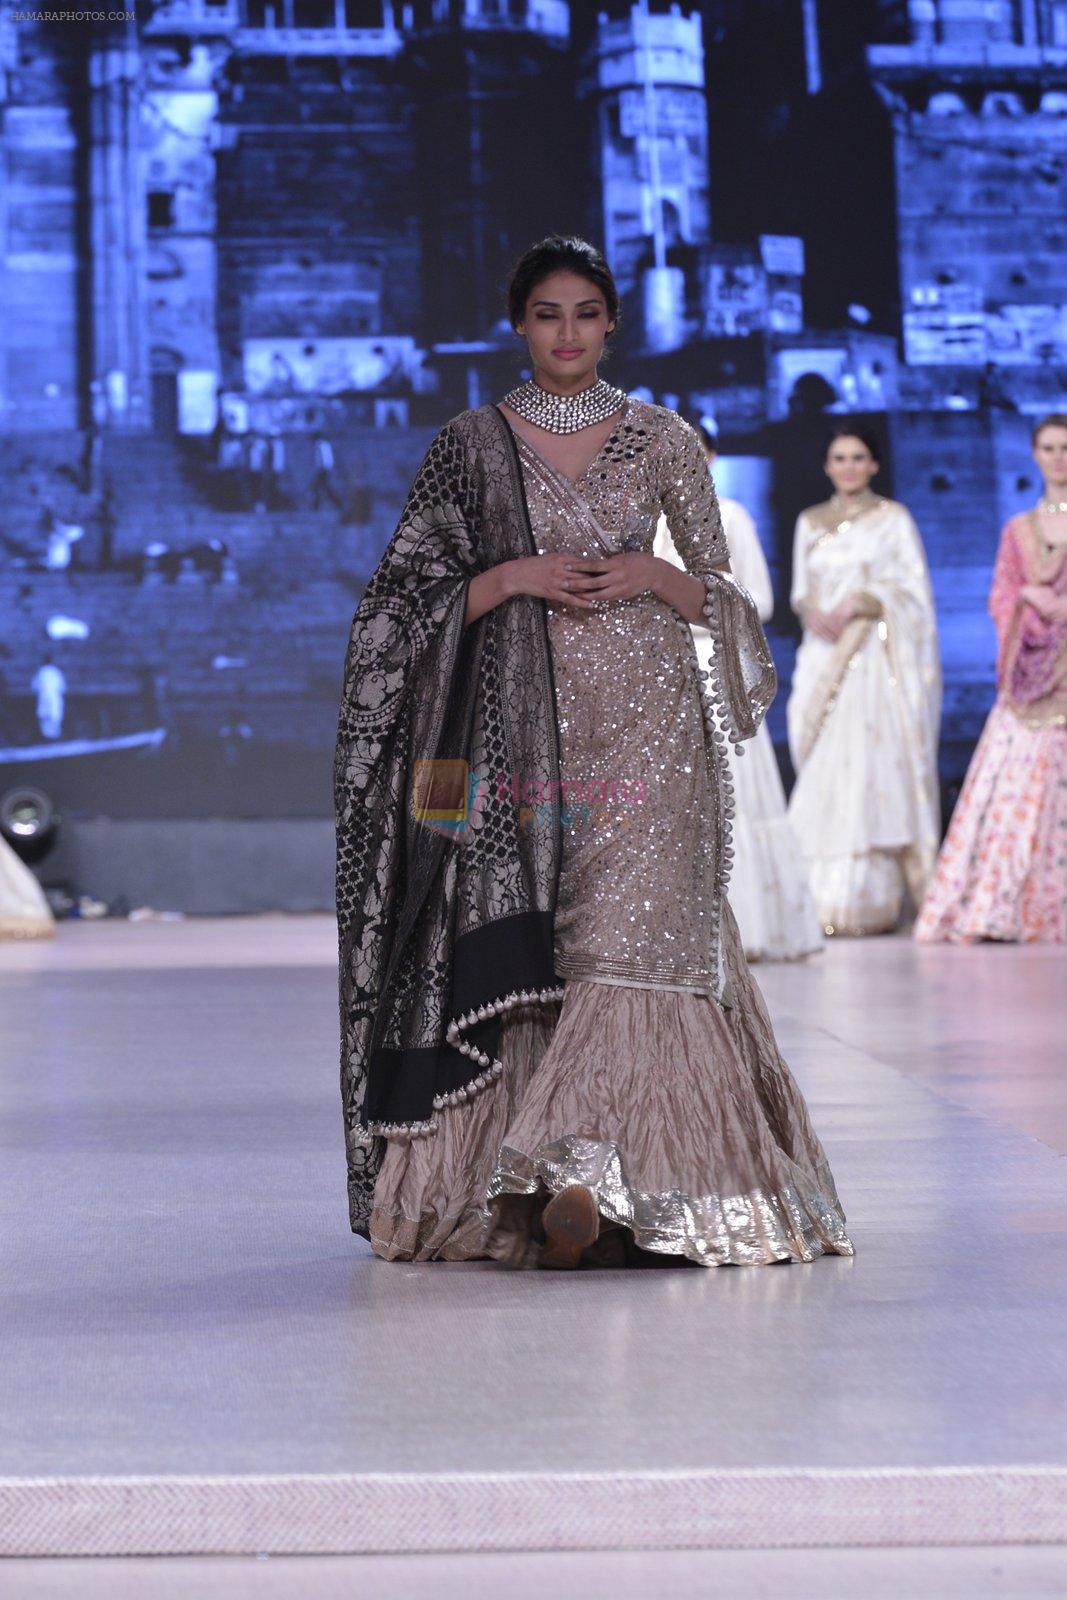 Athiya Shetty walk the ramp for Manish Malhotra's show at CPAA Fevicol SHOW on 20th March 2016